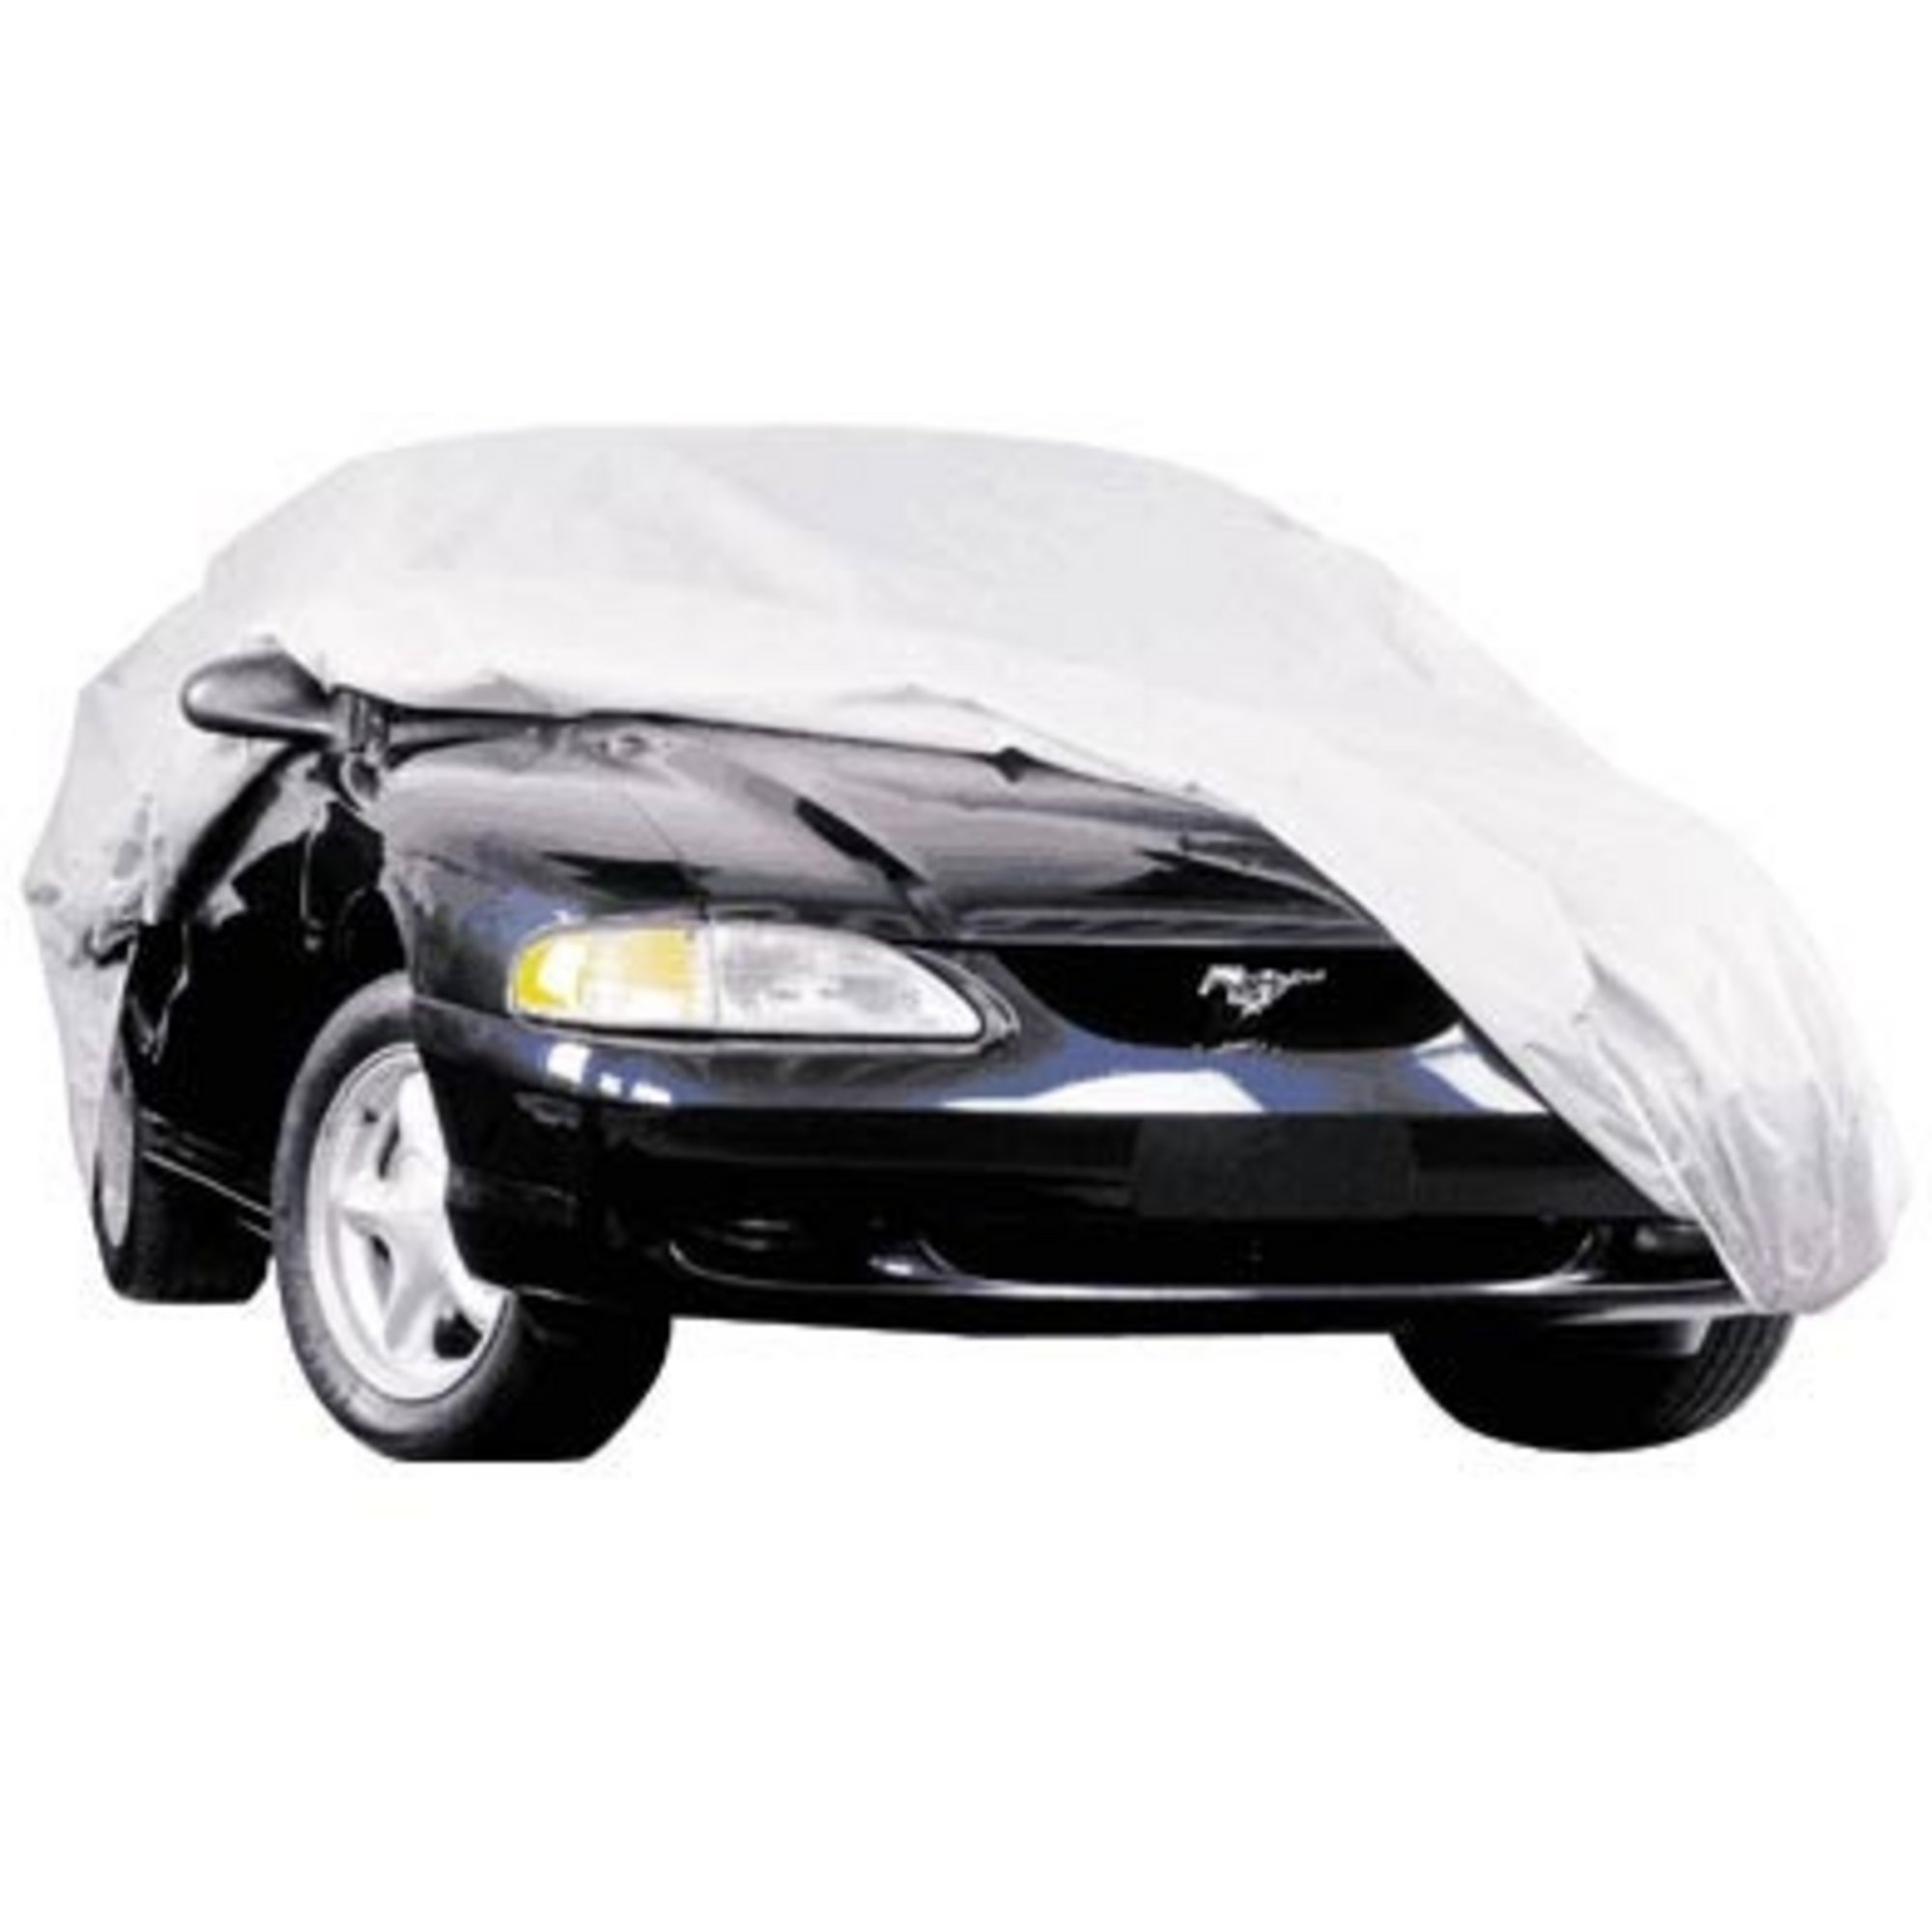 2XL Car Cover Fits Up to 22ft.